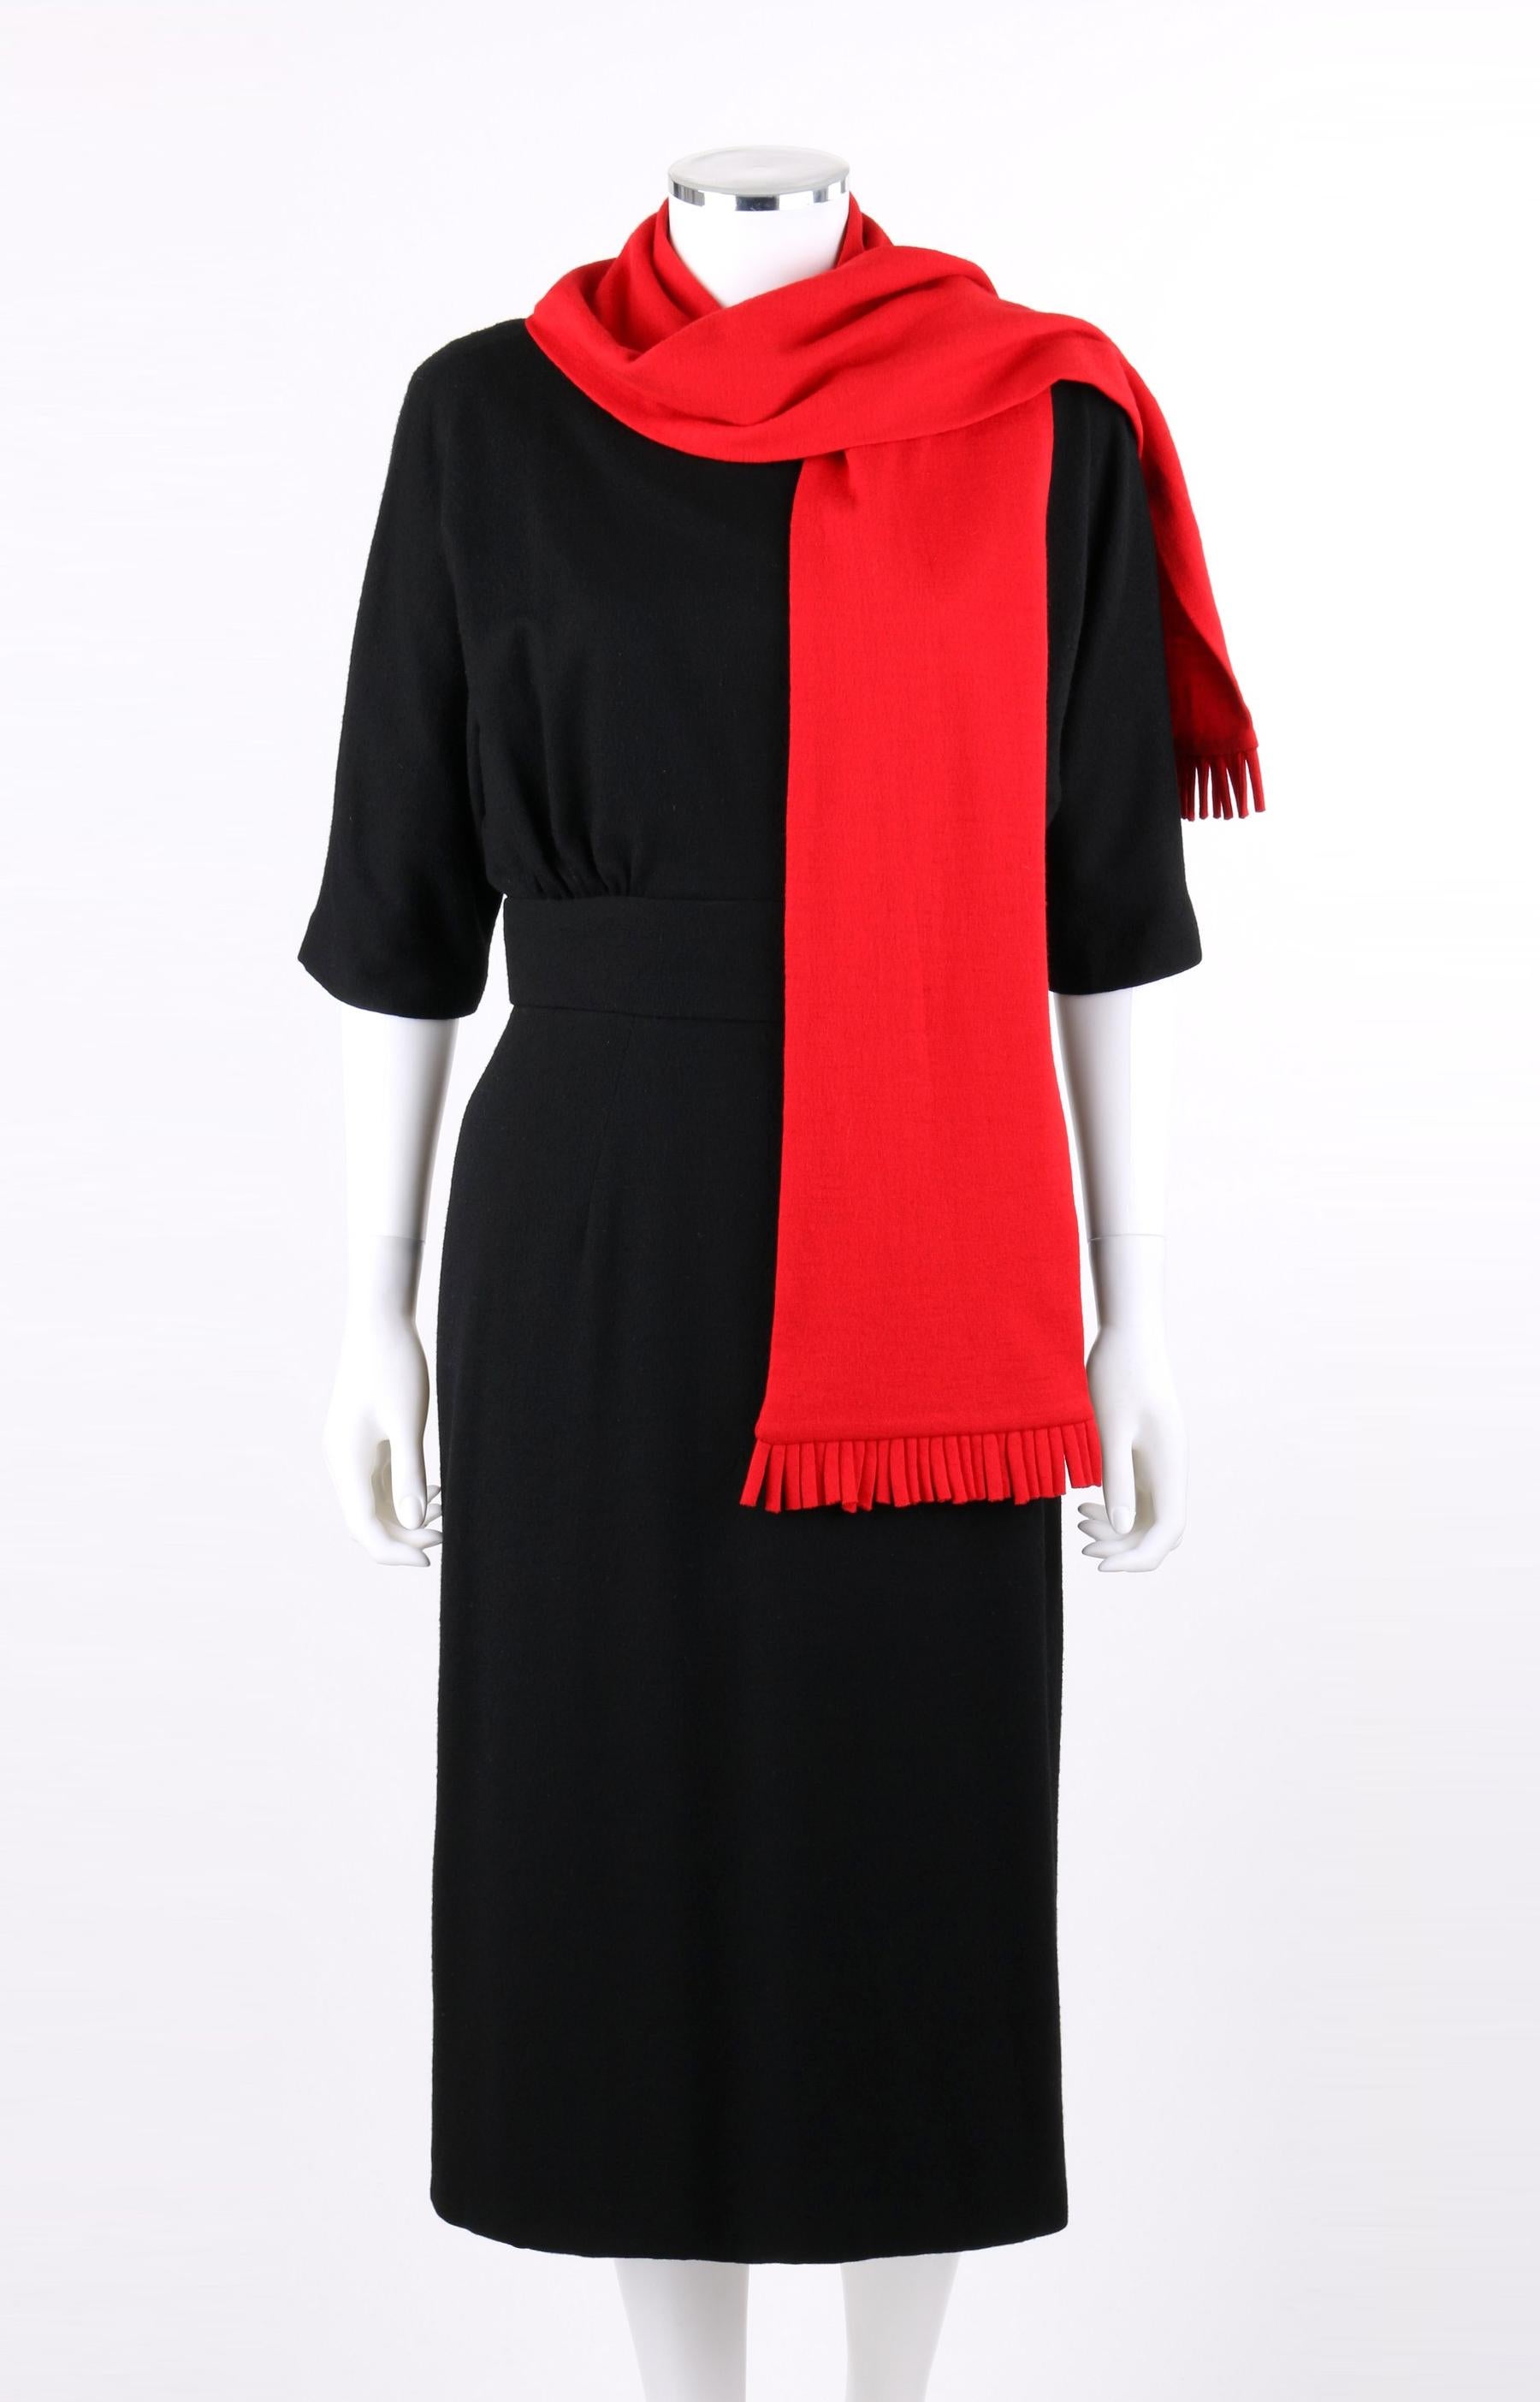 DESCRIPTION: SUZY PERETTE c.1960s 2Pc Black Dolman Sleeve Knit Cocktail Dress w/ Fringe Scarf
 
Circa: c.1960’s
Label(s): Suzy Perette New York; Union Label 
Designer: Evelyn Dawson
Style: Shift dress
Color(s): Black and red
Lined: Yes
Unmarked